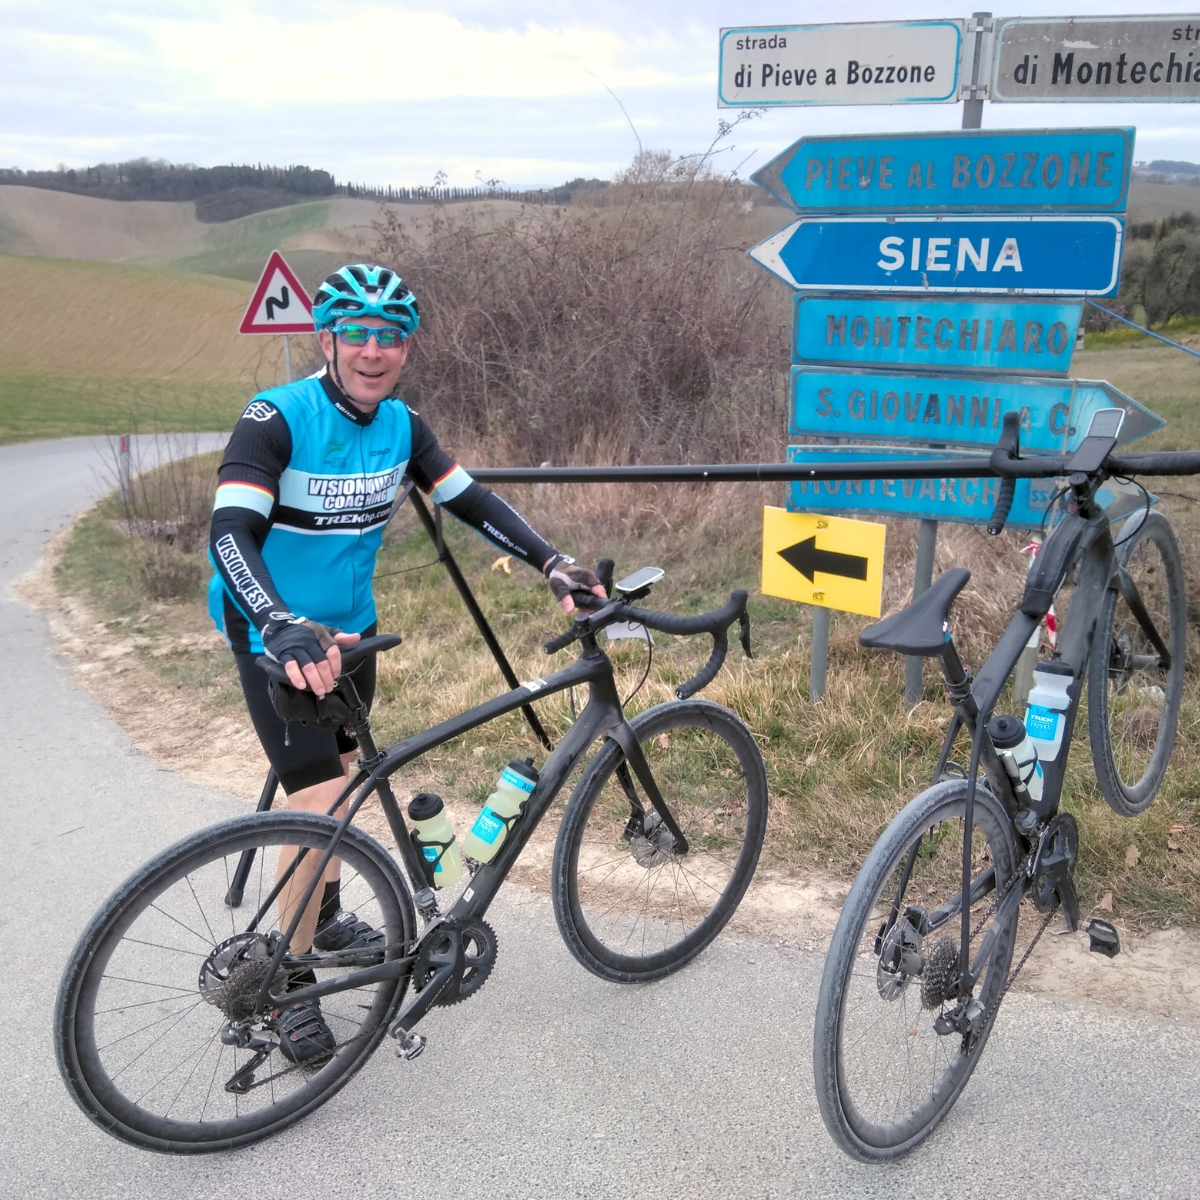 Cyclist with two bicycles and bike rack in front of Siena direction signs